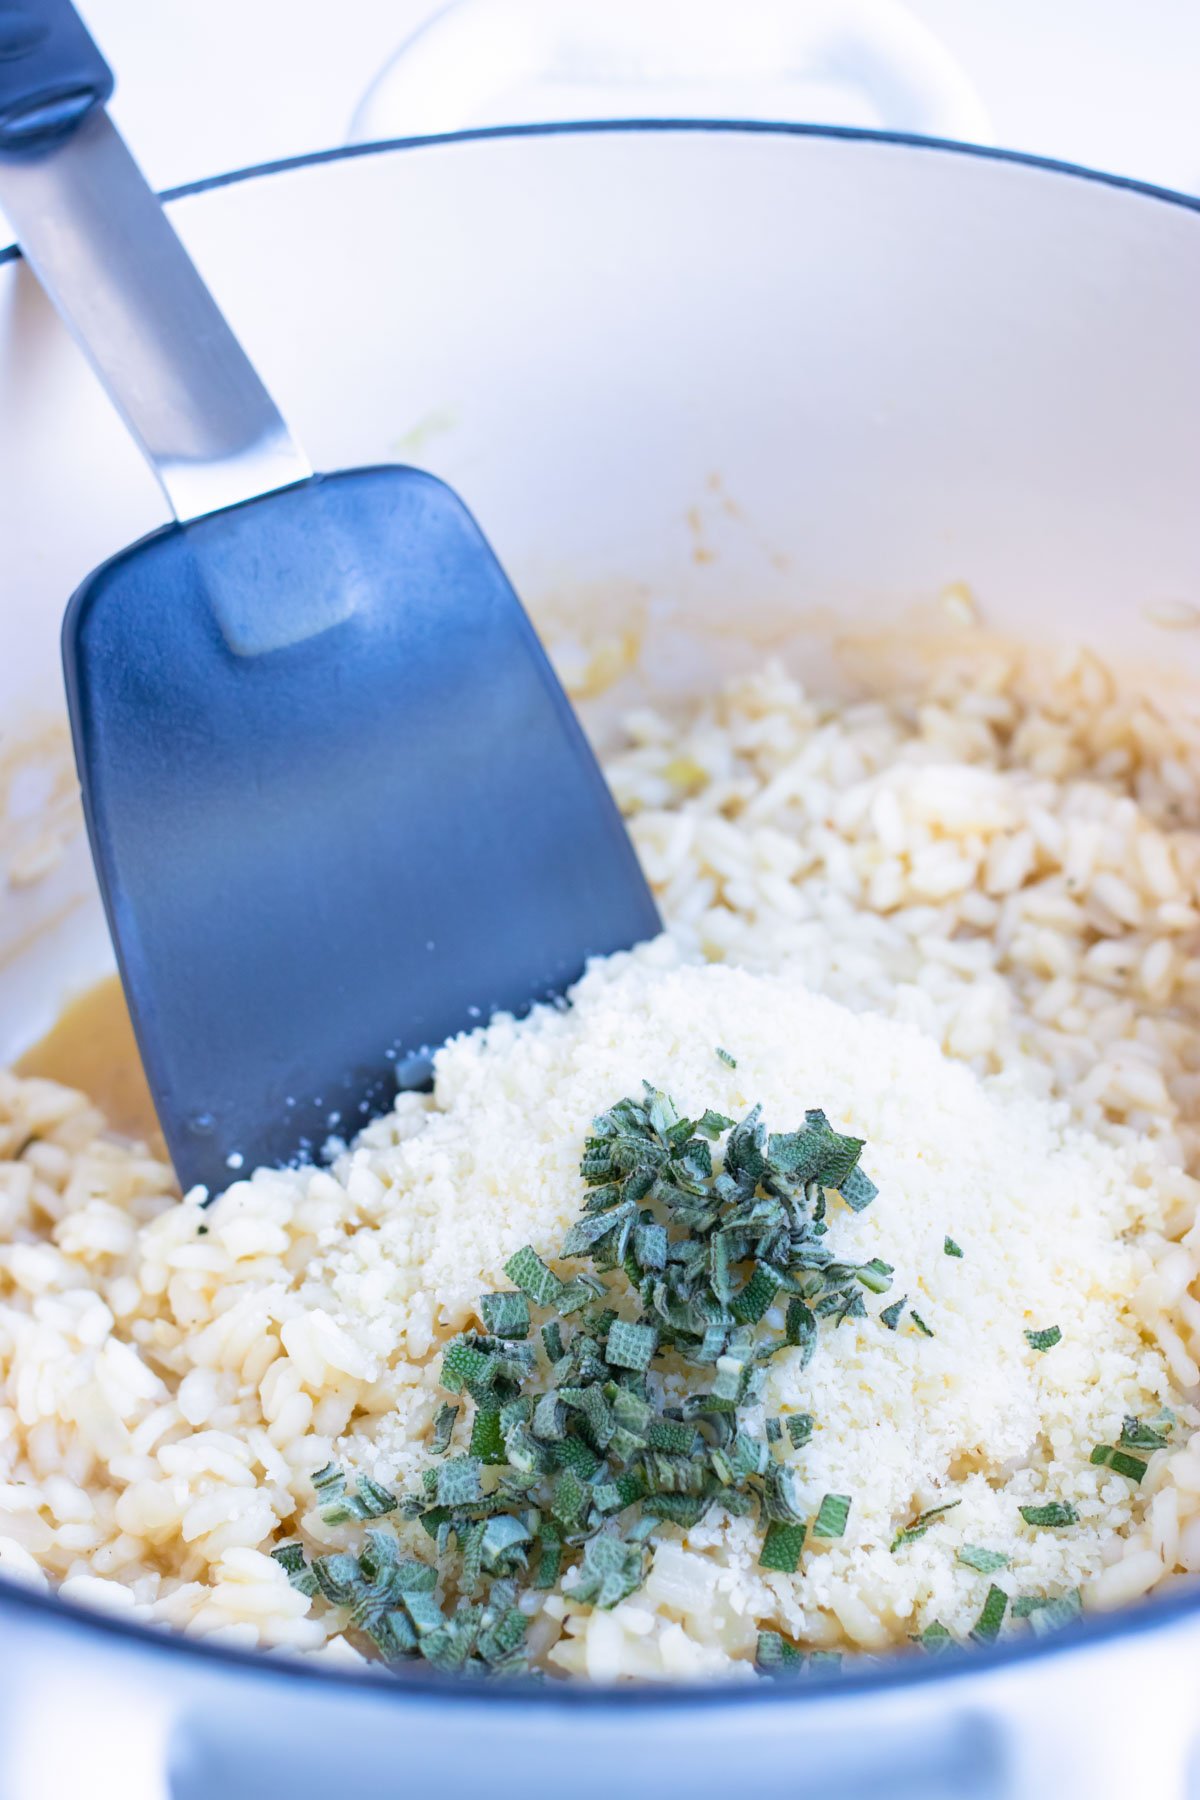 Parmesan cheese and herbs are added to the arborio rice.